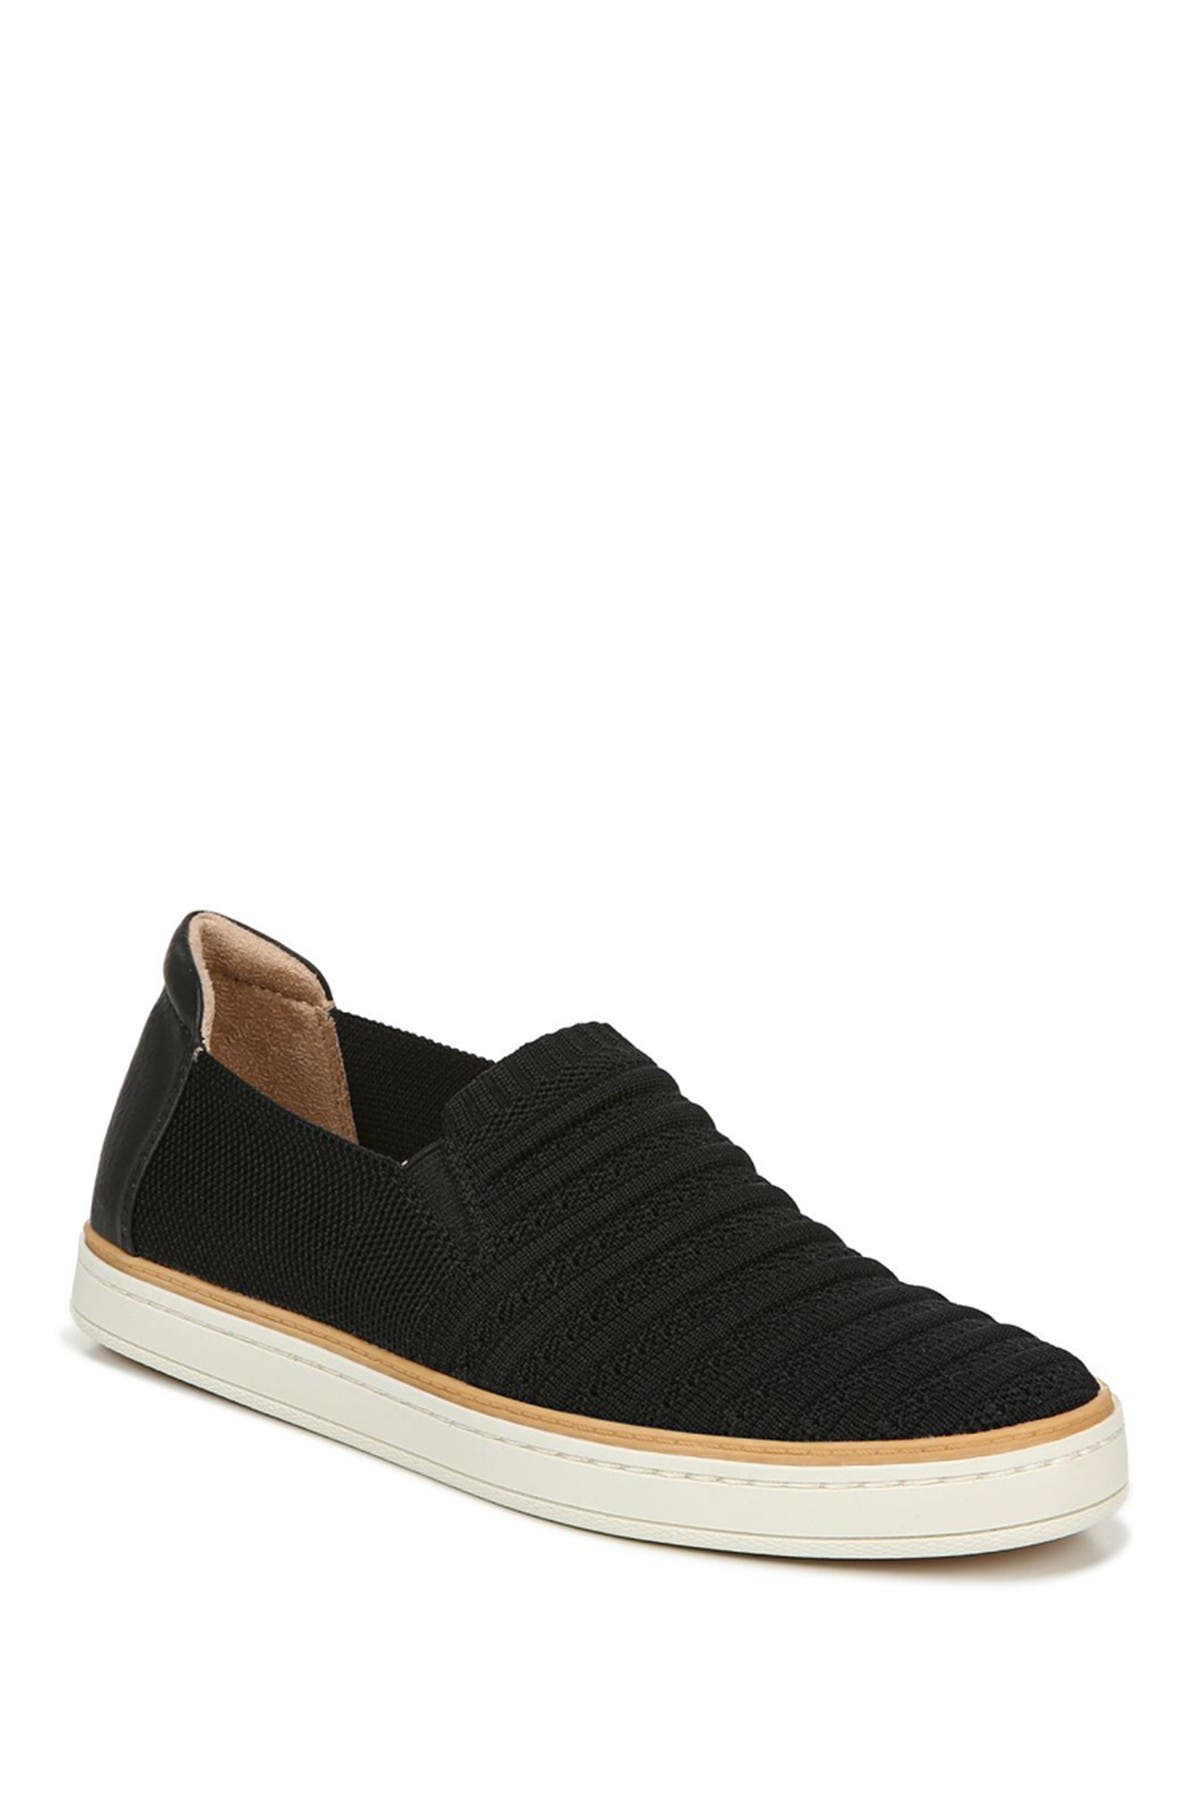 naturalizer sneakers wide